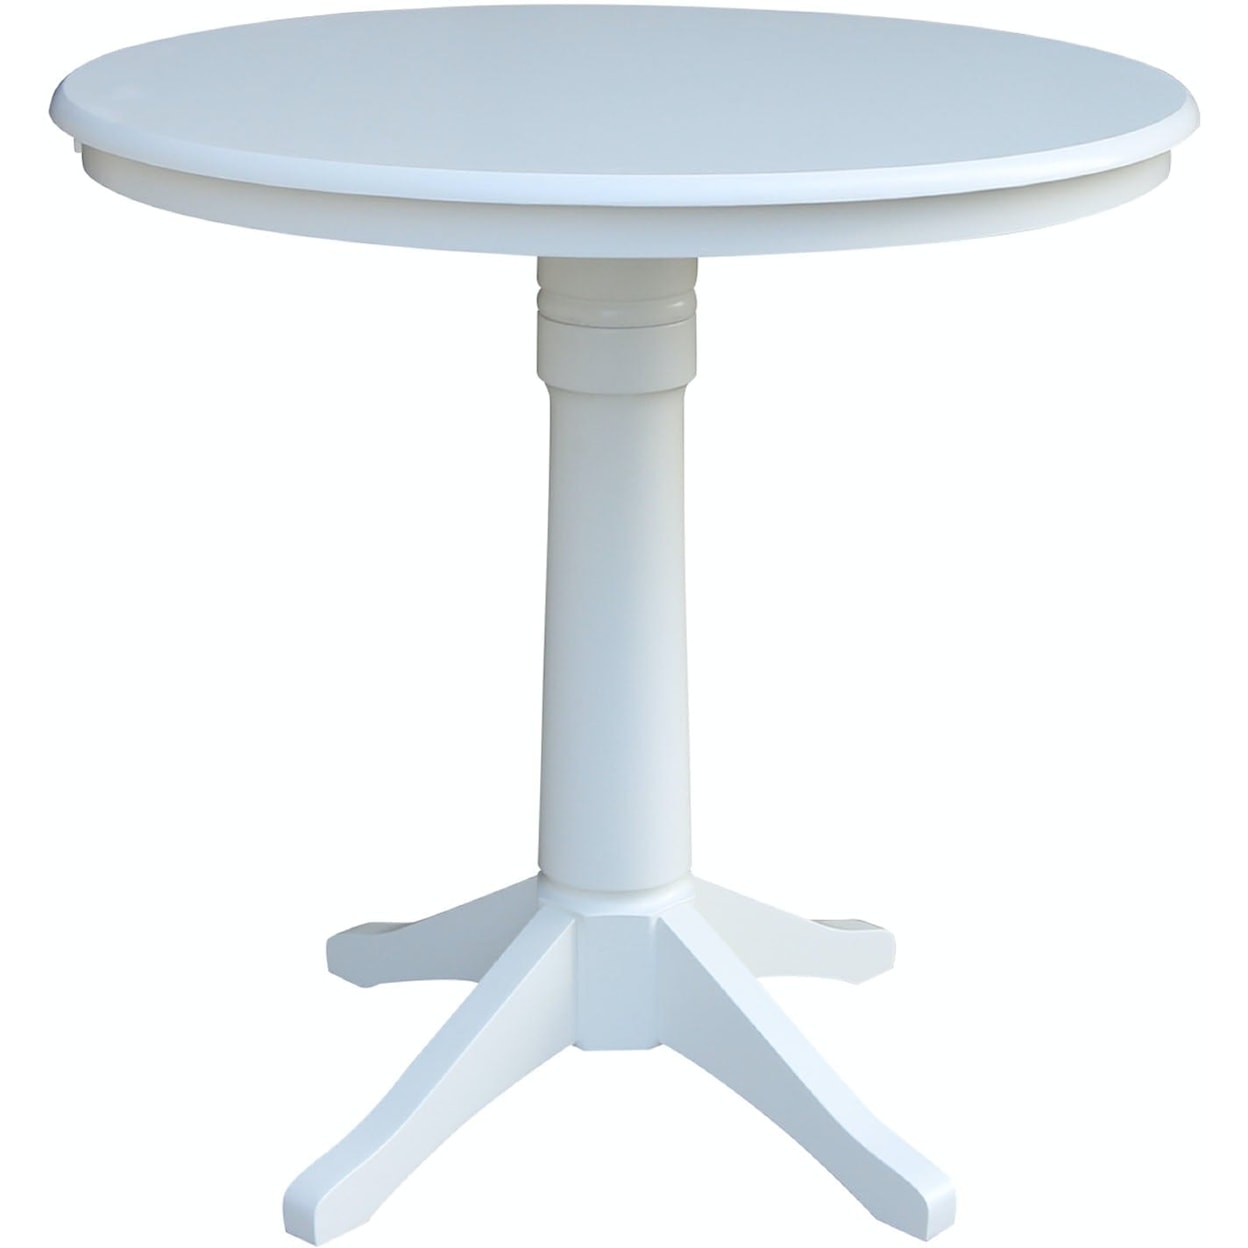 John Thomas Dining Essentials 36'' Pedestal Table in Pure White